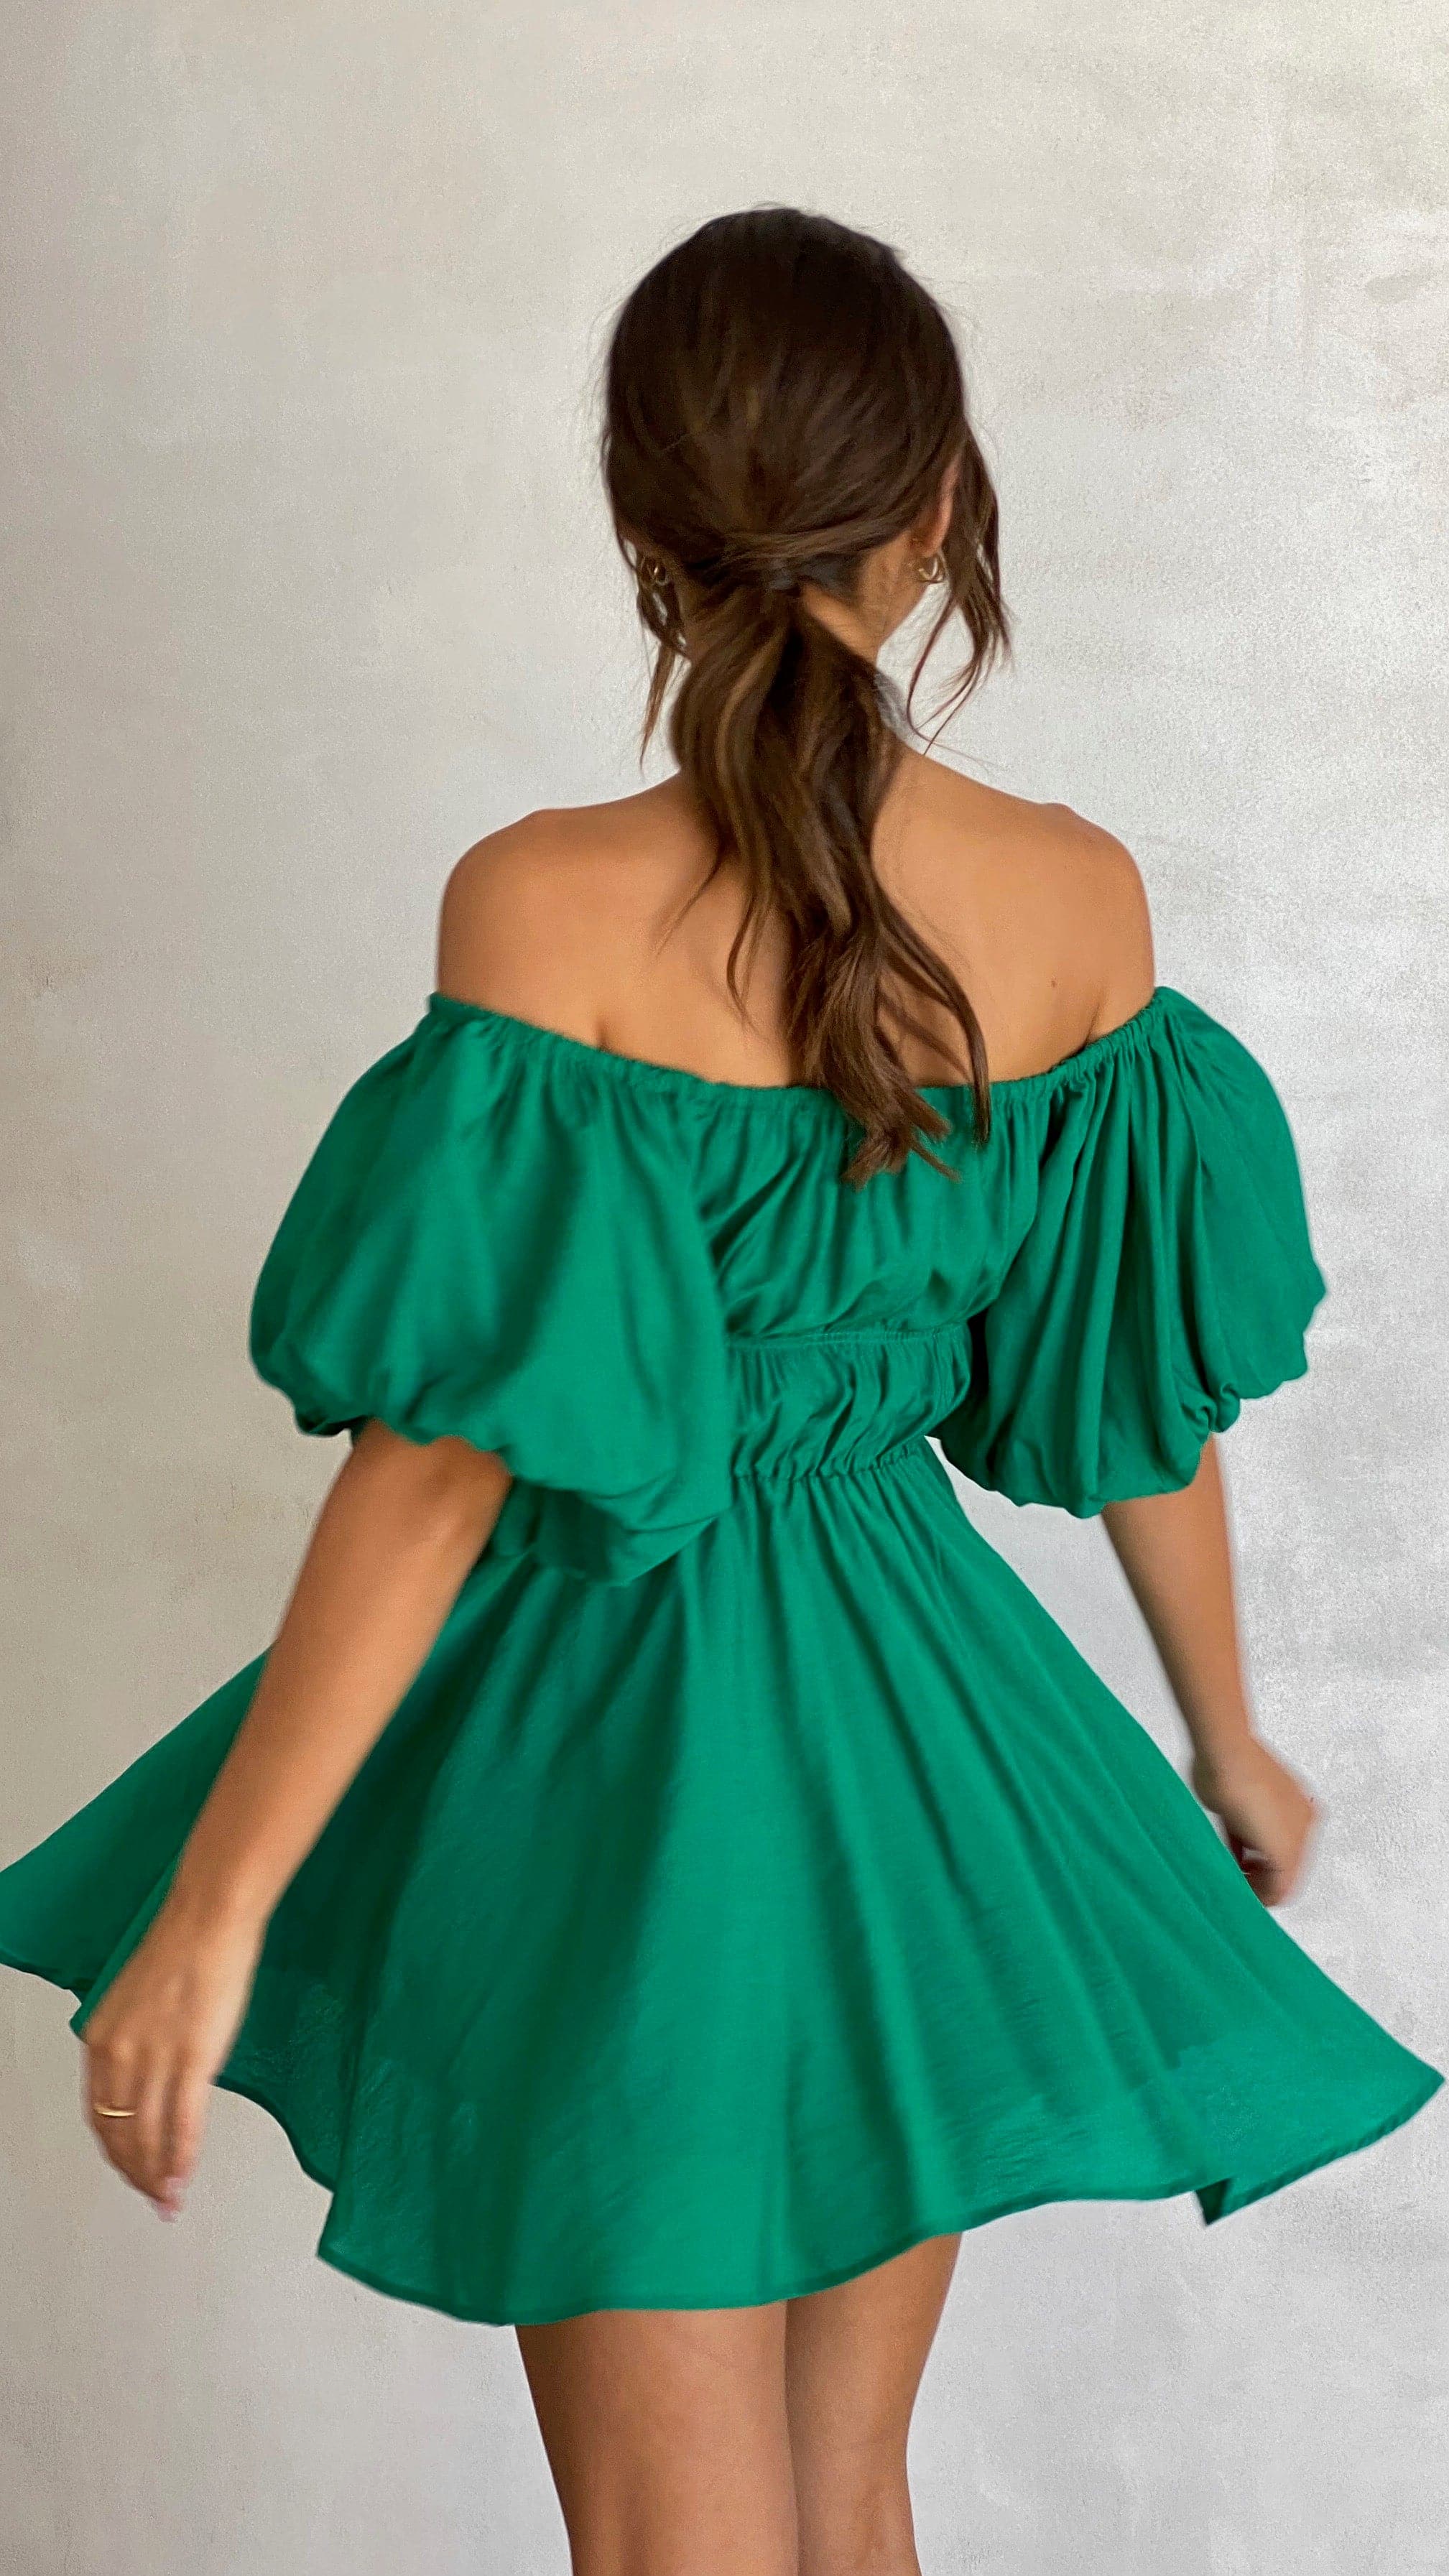 Essence of Style Teal Green Maxi Dress | Teal green dress, Maxi dress green,  Maxi dress